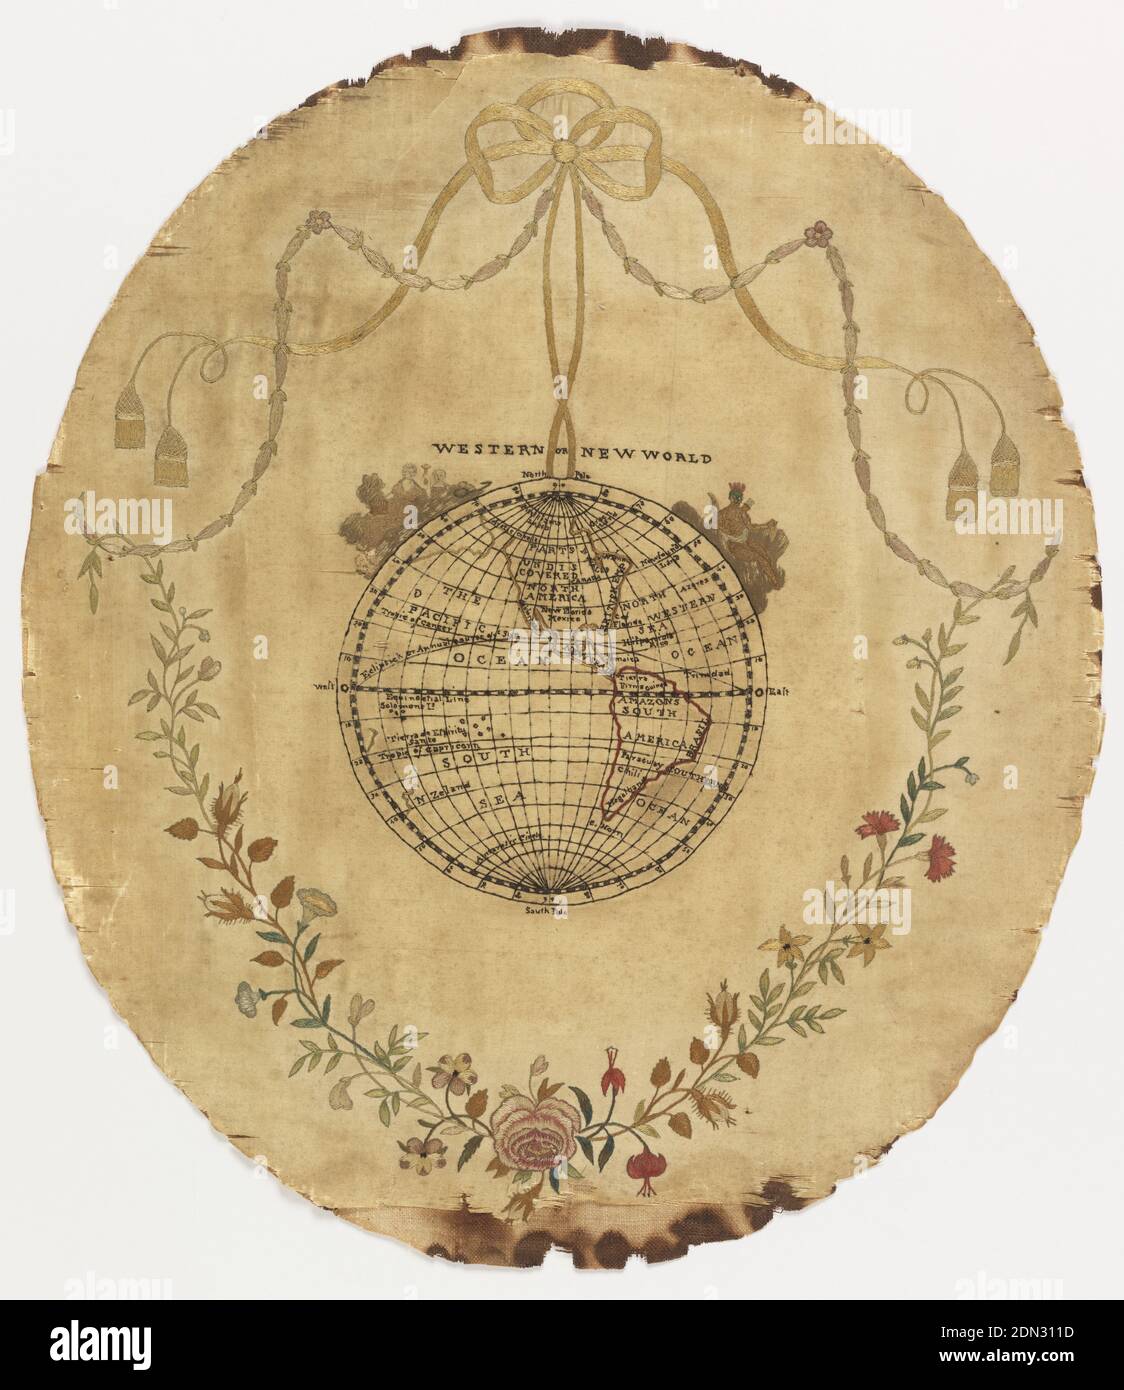 Map sampler, Medium: silk embroidery, paint, silk foundation Technique: satin, split, and stem stitches on plain weave, Globe showing North and South America with figures representing colonists and a Native American Indian. Surrounded by flowering sprays tied with tasseled ribbon., England, late 18th century, embroidery & stitching, Map sampler Stock Photo